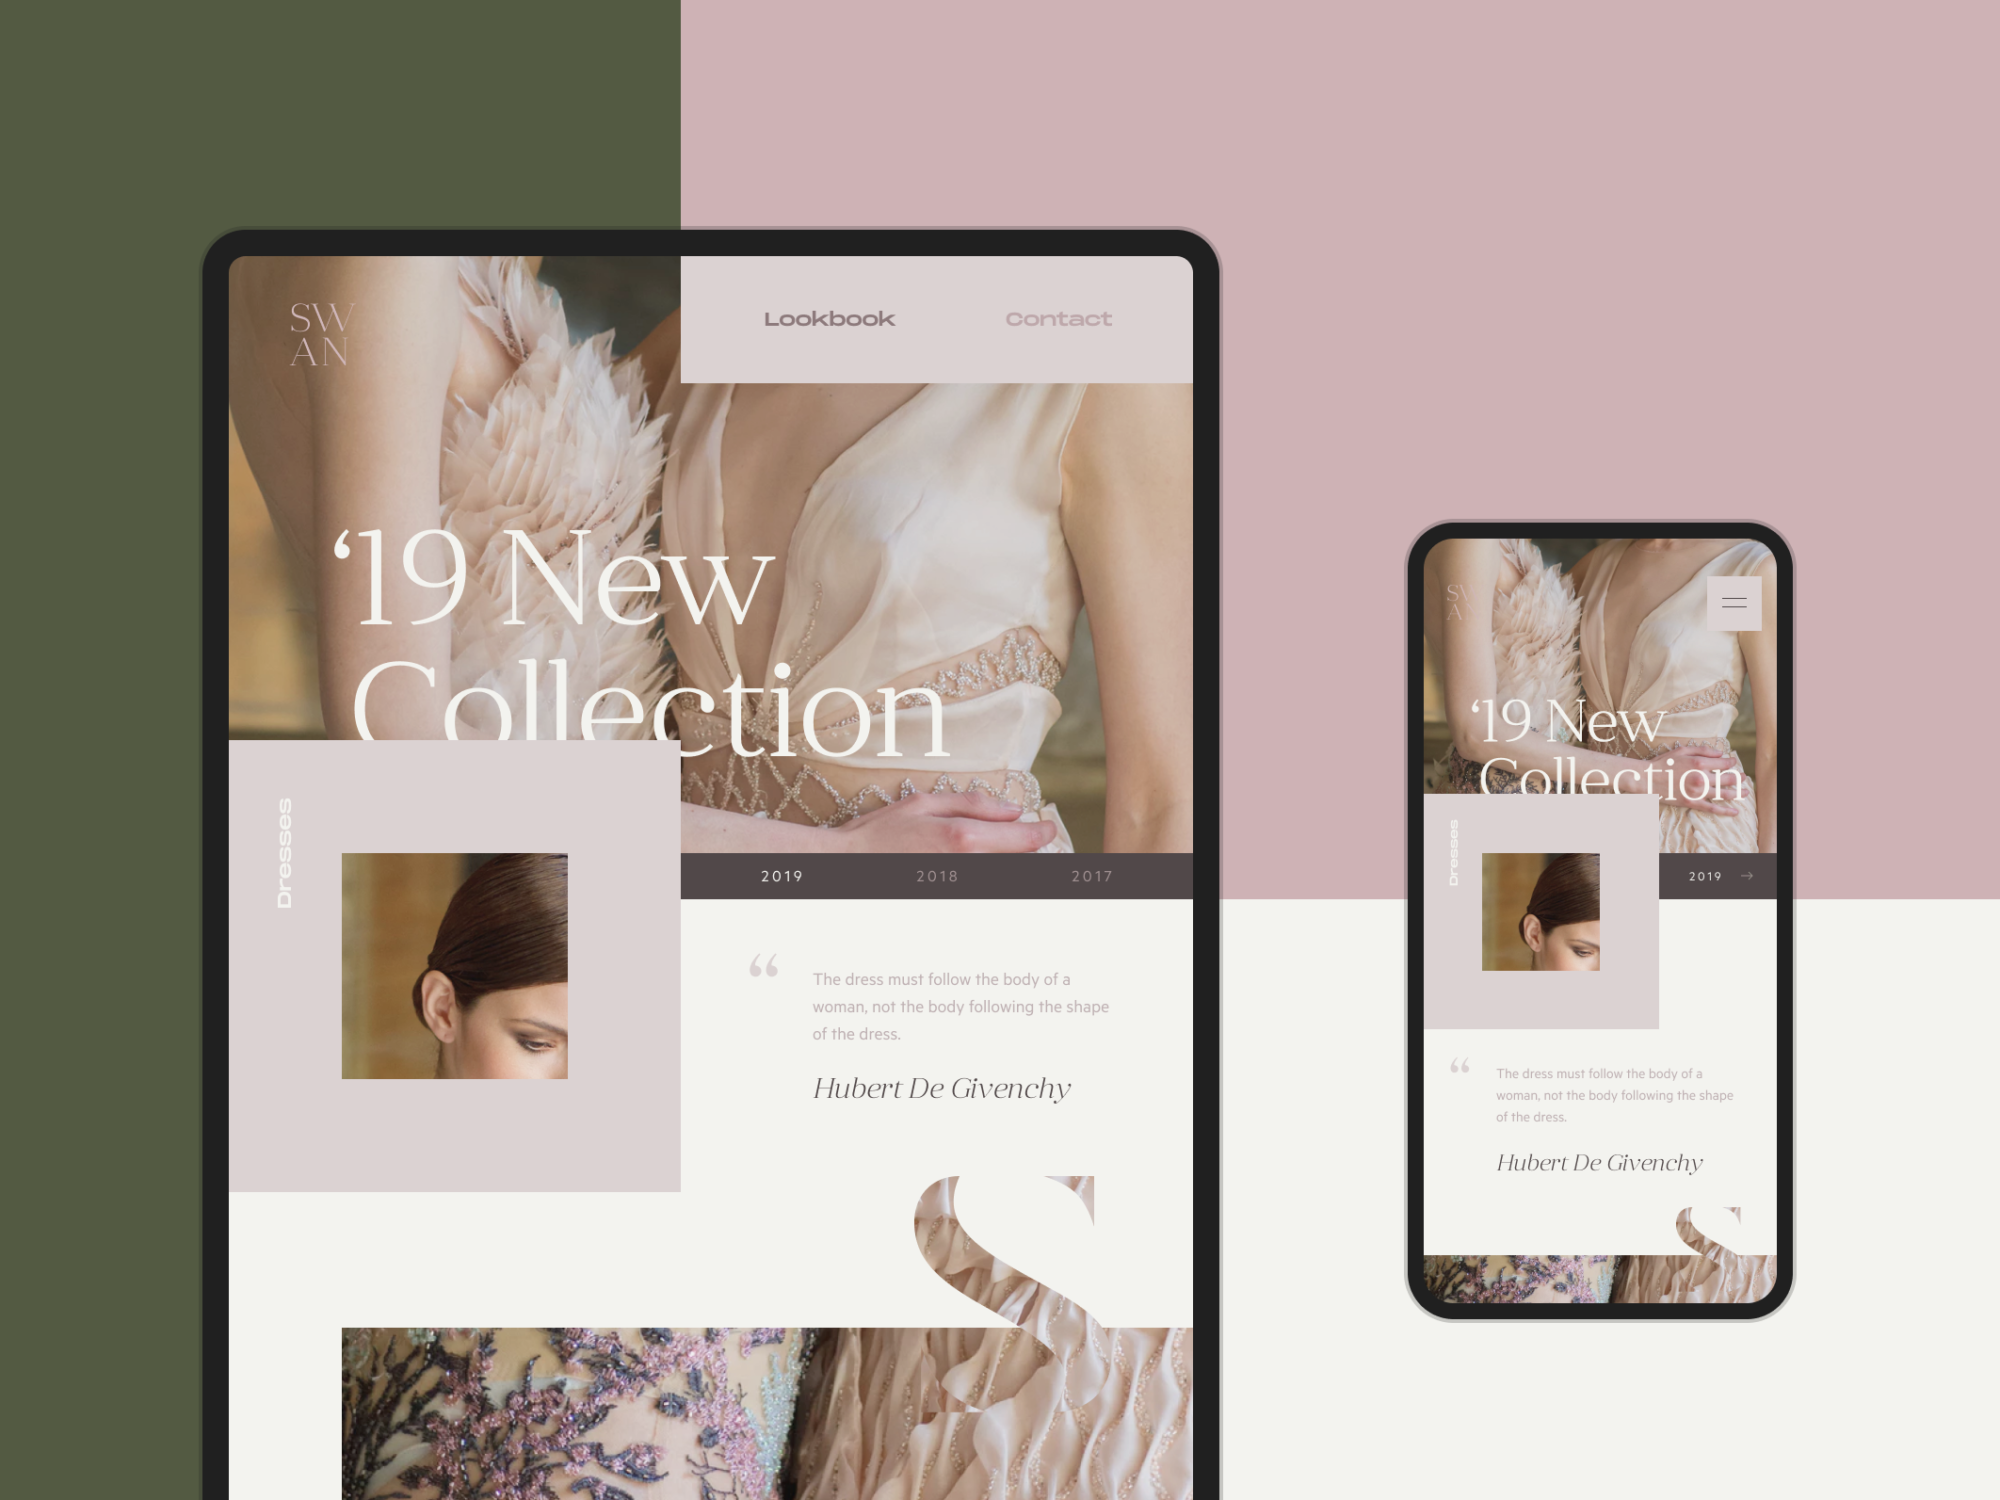 Handy Guide To Designing a Visually Appealing Online Boutique